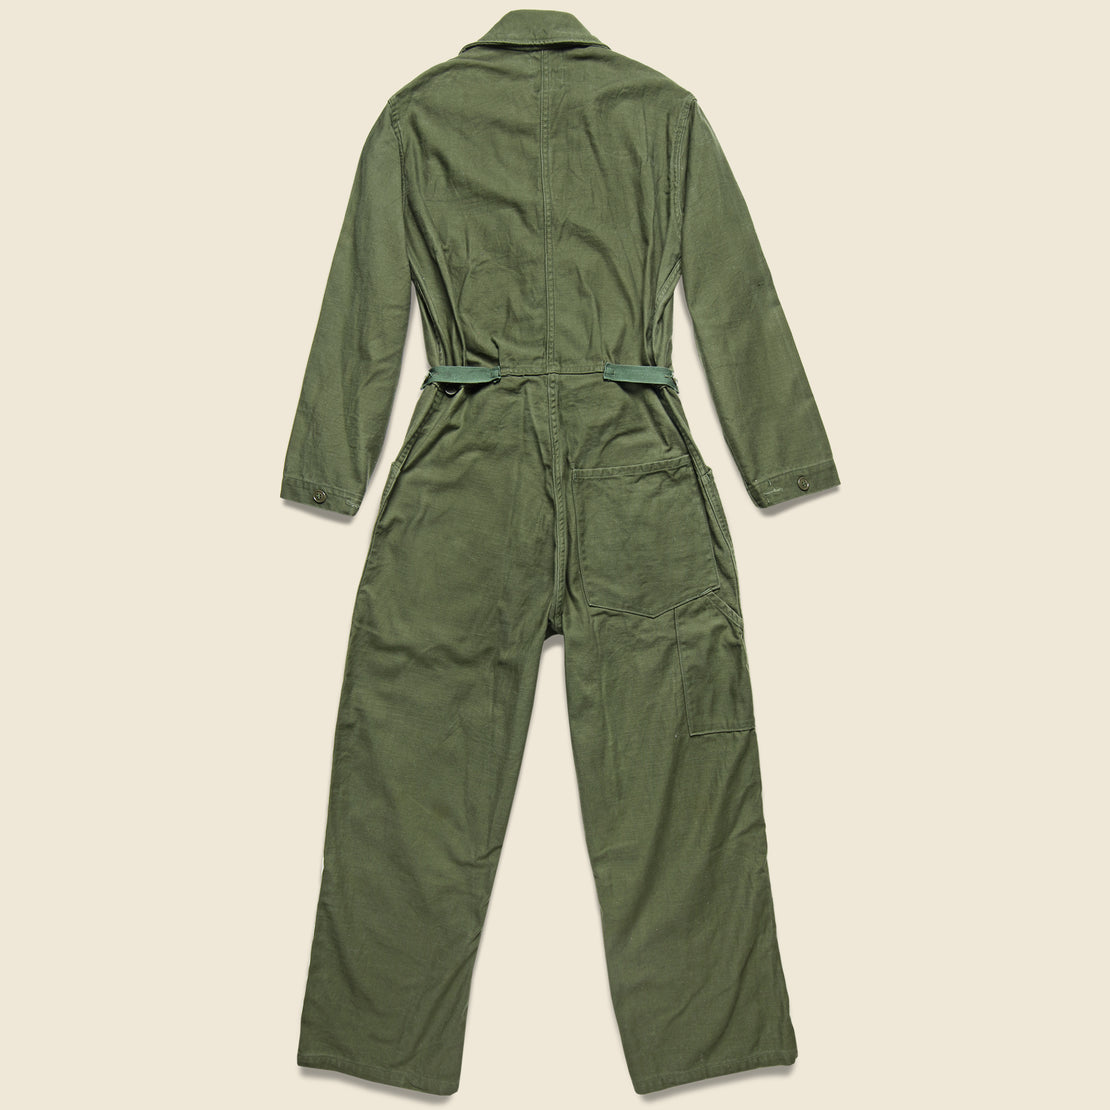 Cotton Sateen Type I Military Coverall - Olive Drab - Vintage - STAG Provisions - W - Onepiece - Jumpsuit